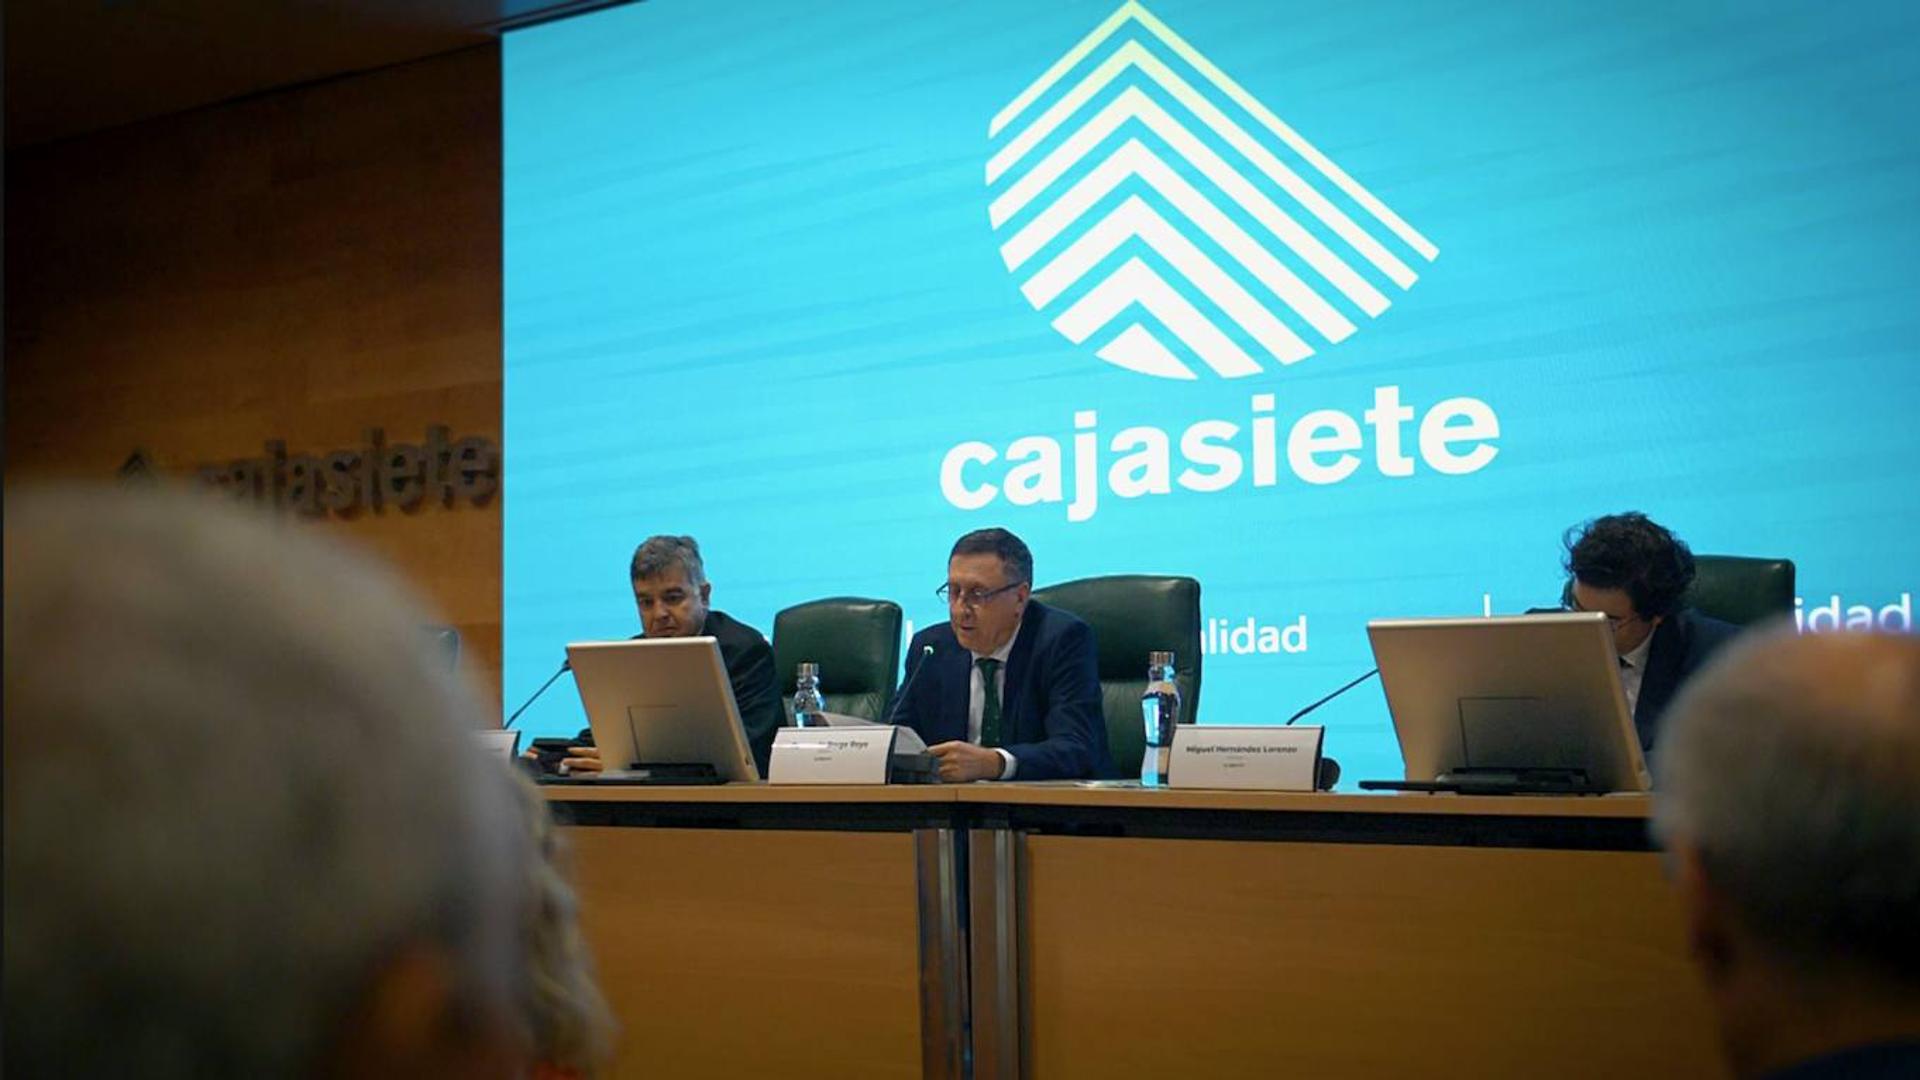 Cajasiete continues to consolidate its position in the Canary Islands financial market